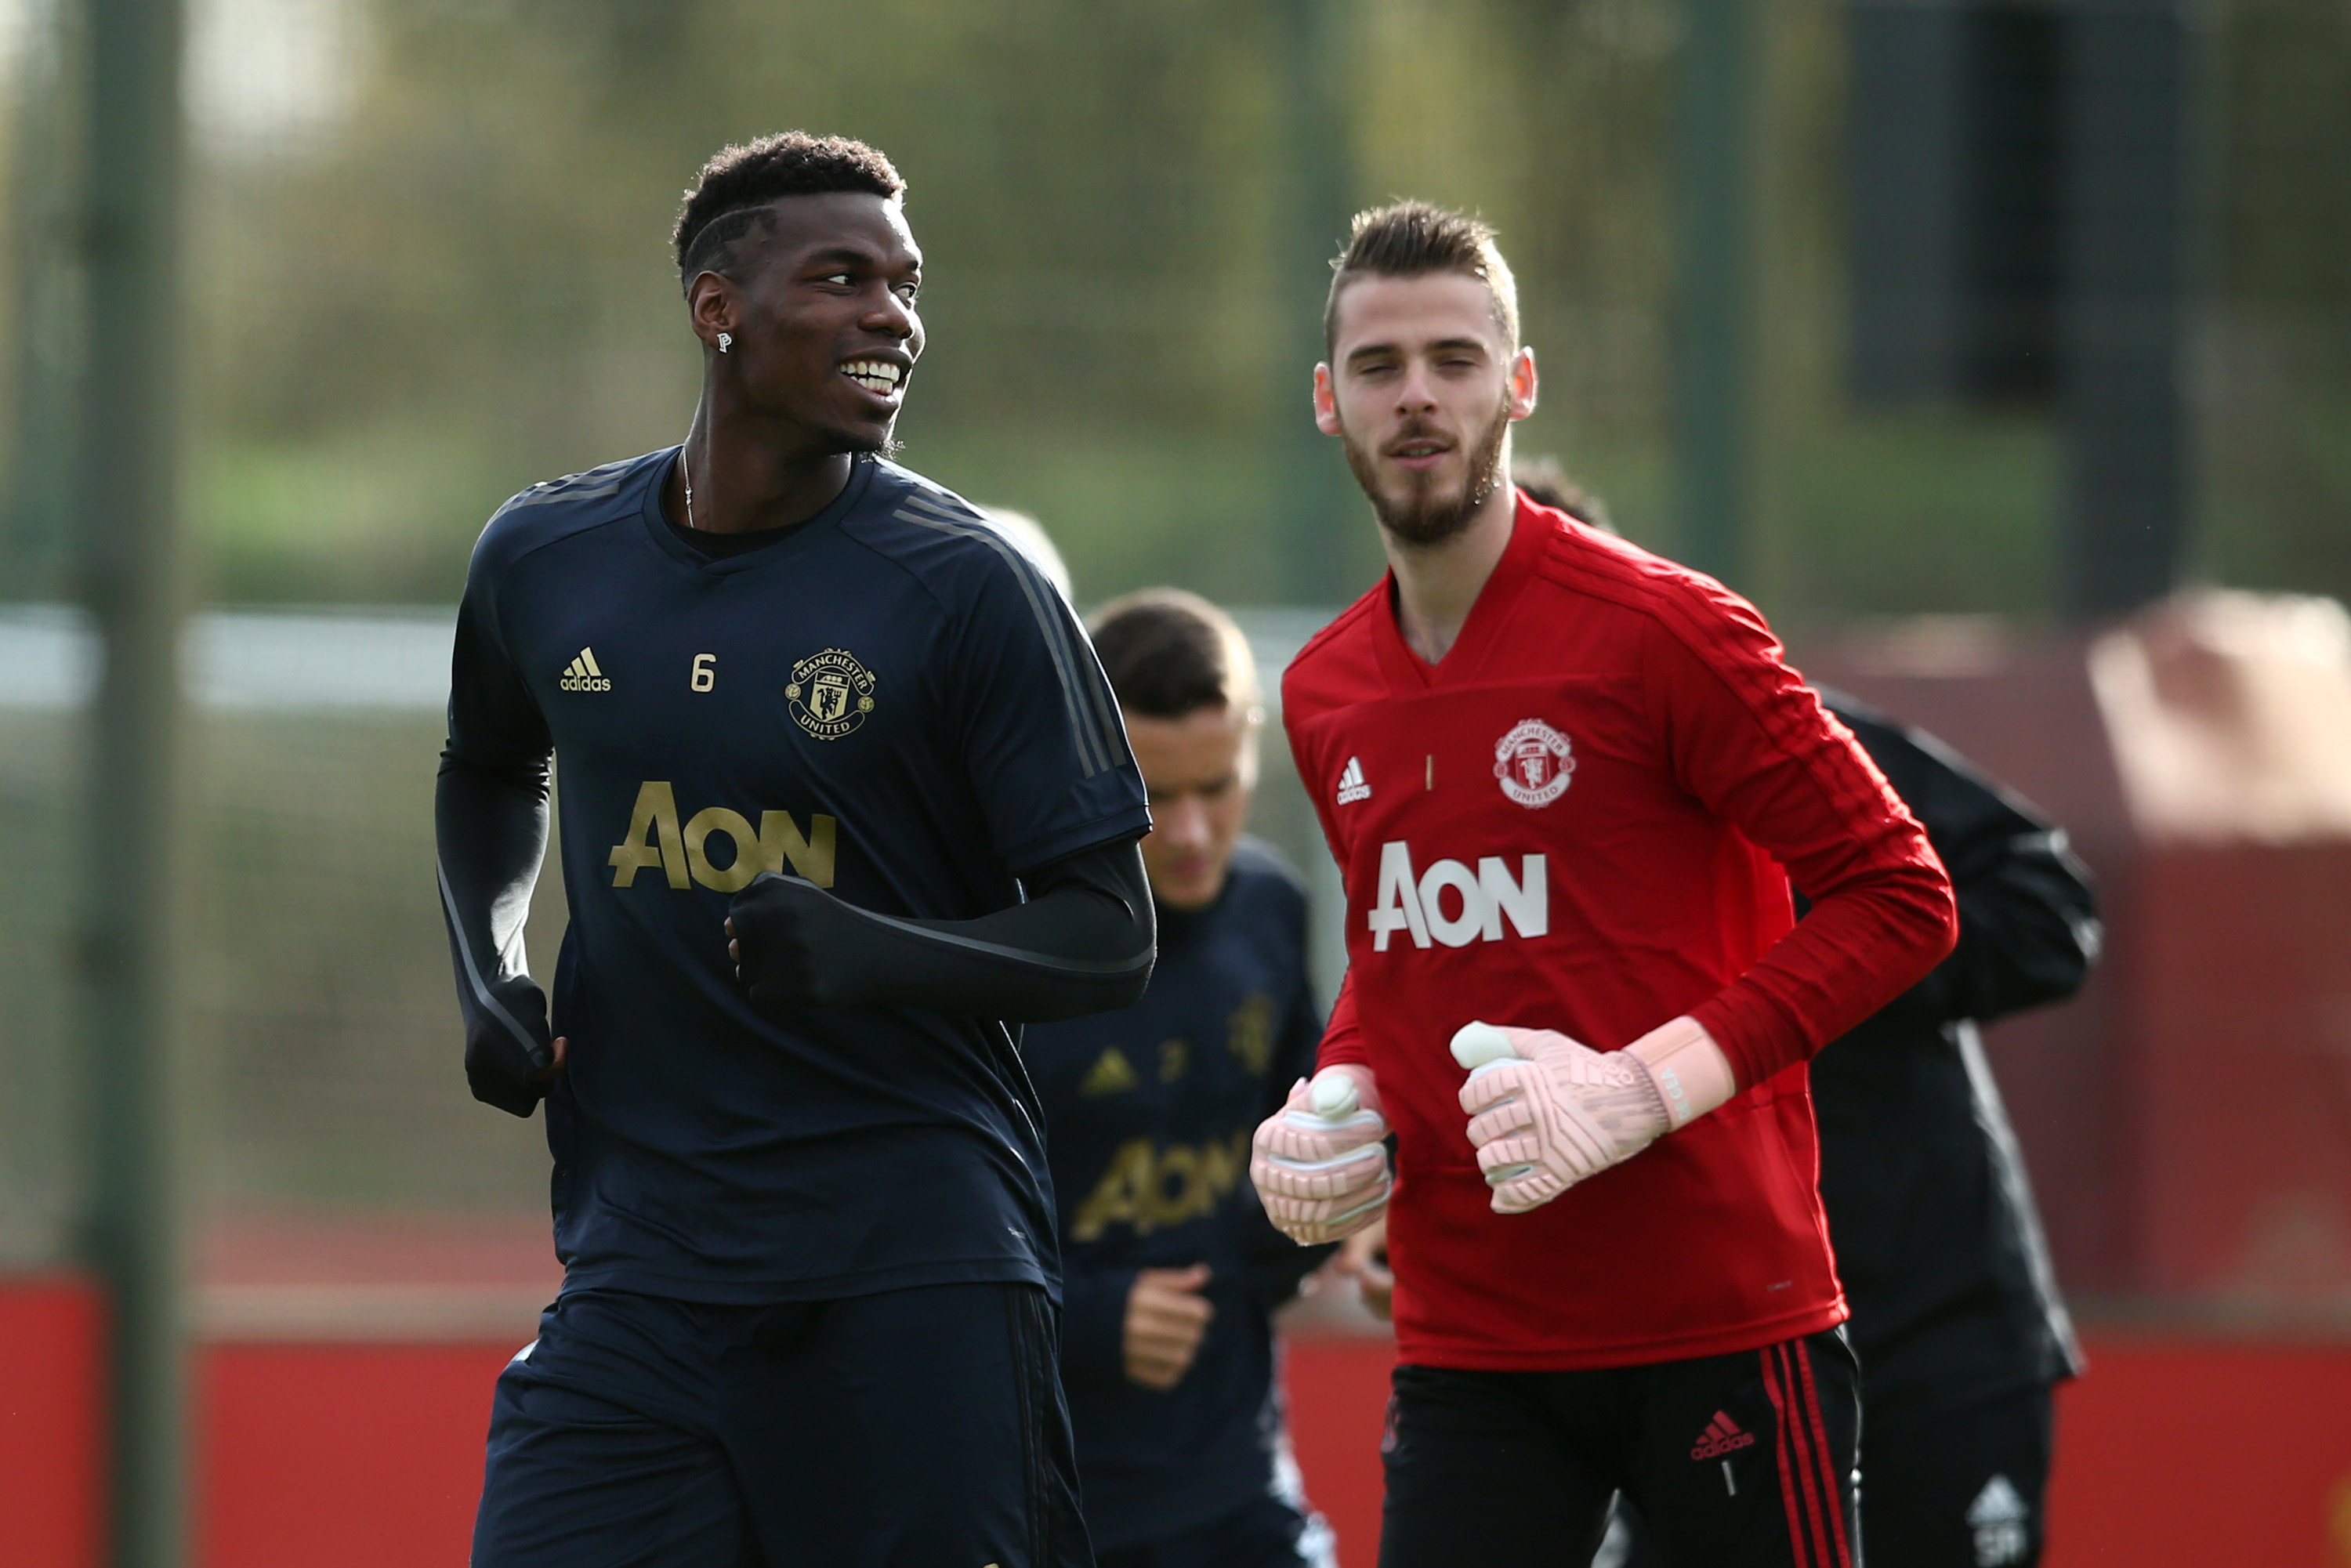 MANCHESTER, ENGLAND - OCTOBER 22:  Paul Pogba  and David De Gea of Manchester United warm up during a training session ahead of their UEFA Champions League Group H match against Juventus at Aon Training Complex on October 22, 2018 in Manchester, England.  (Photo by Jan Kruger/Getty Images)